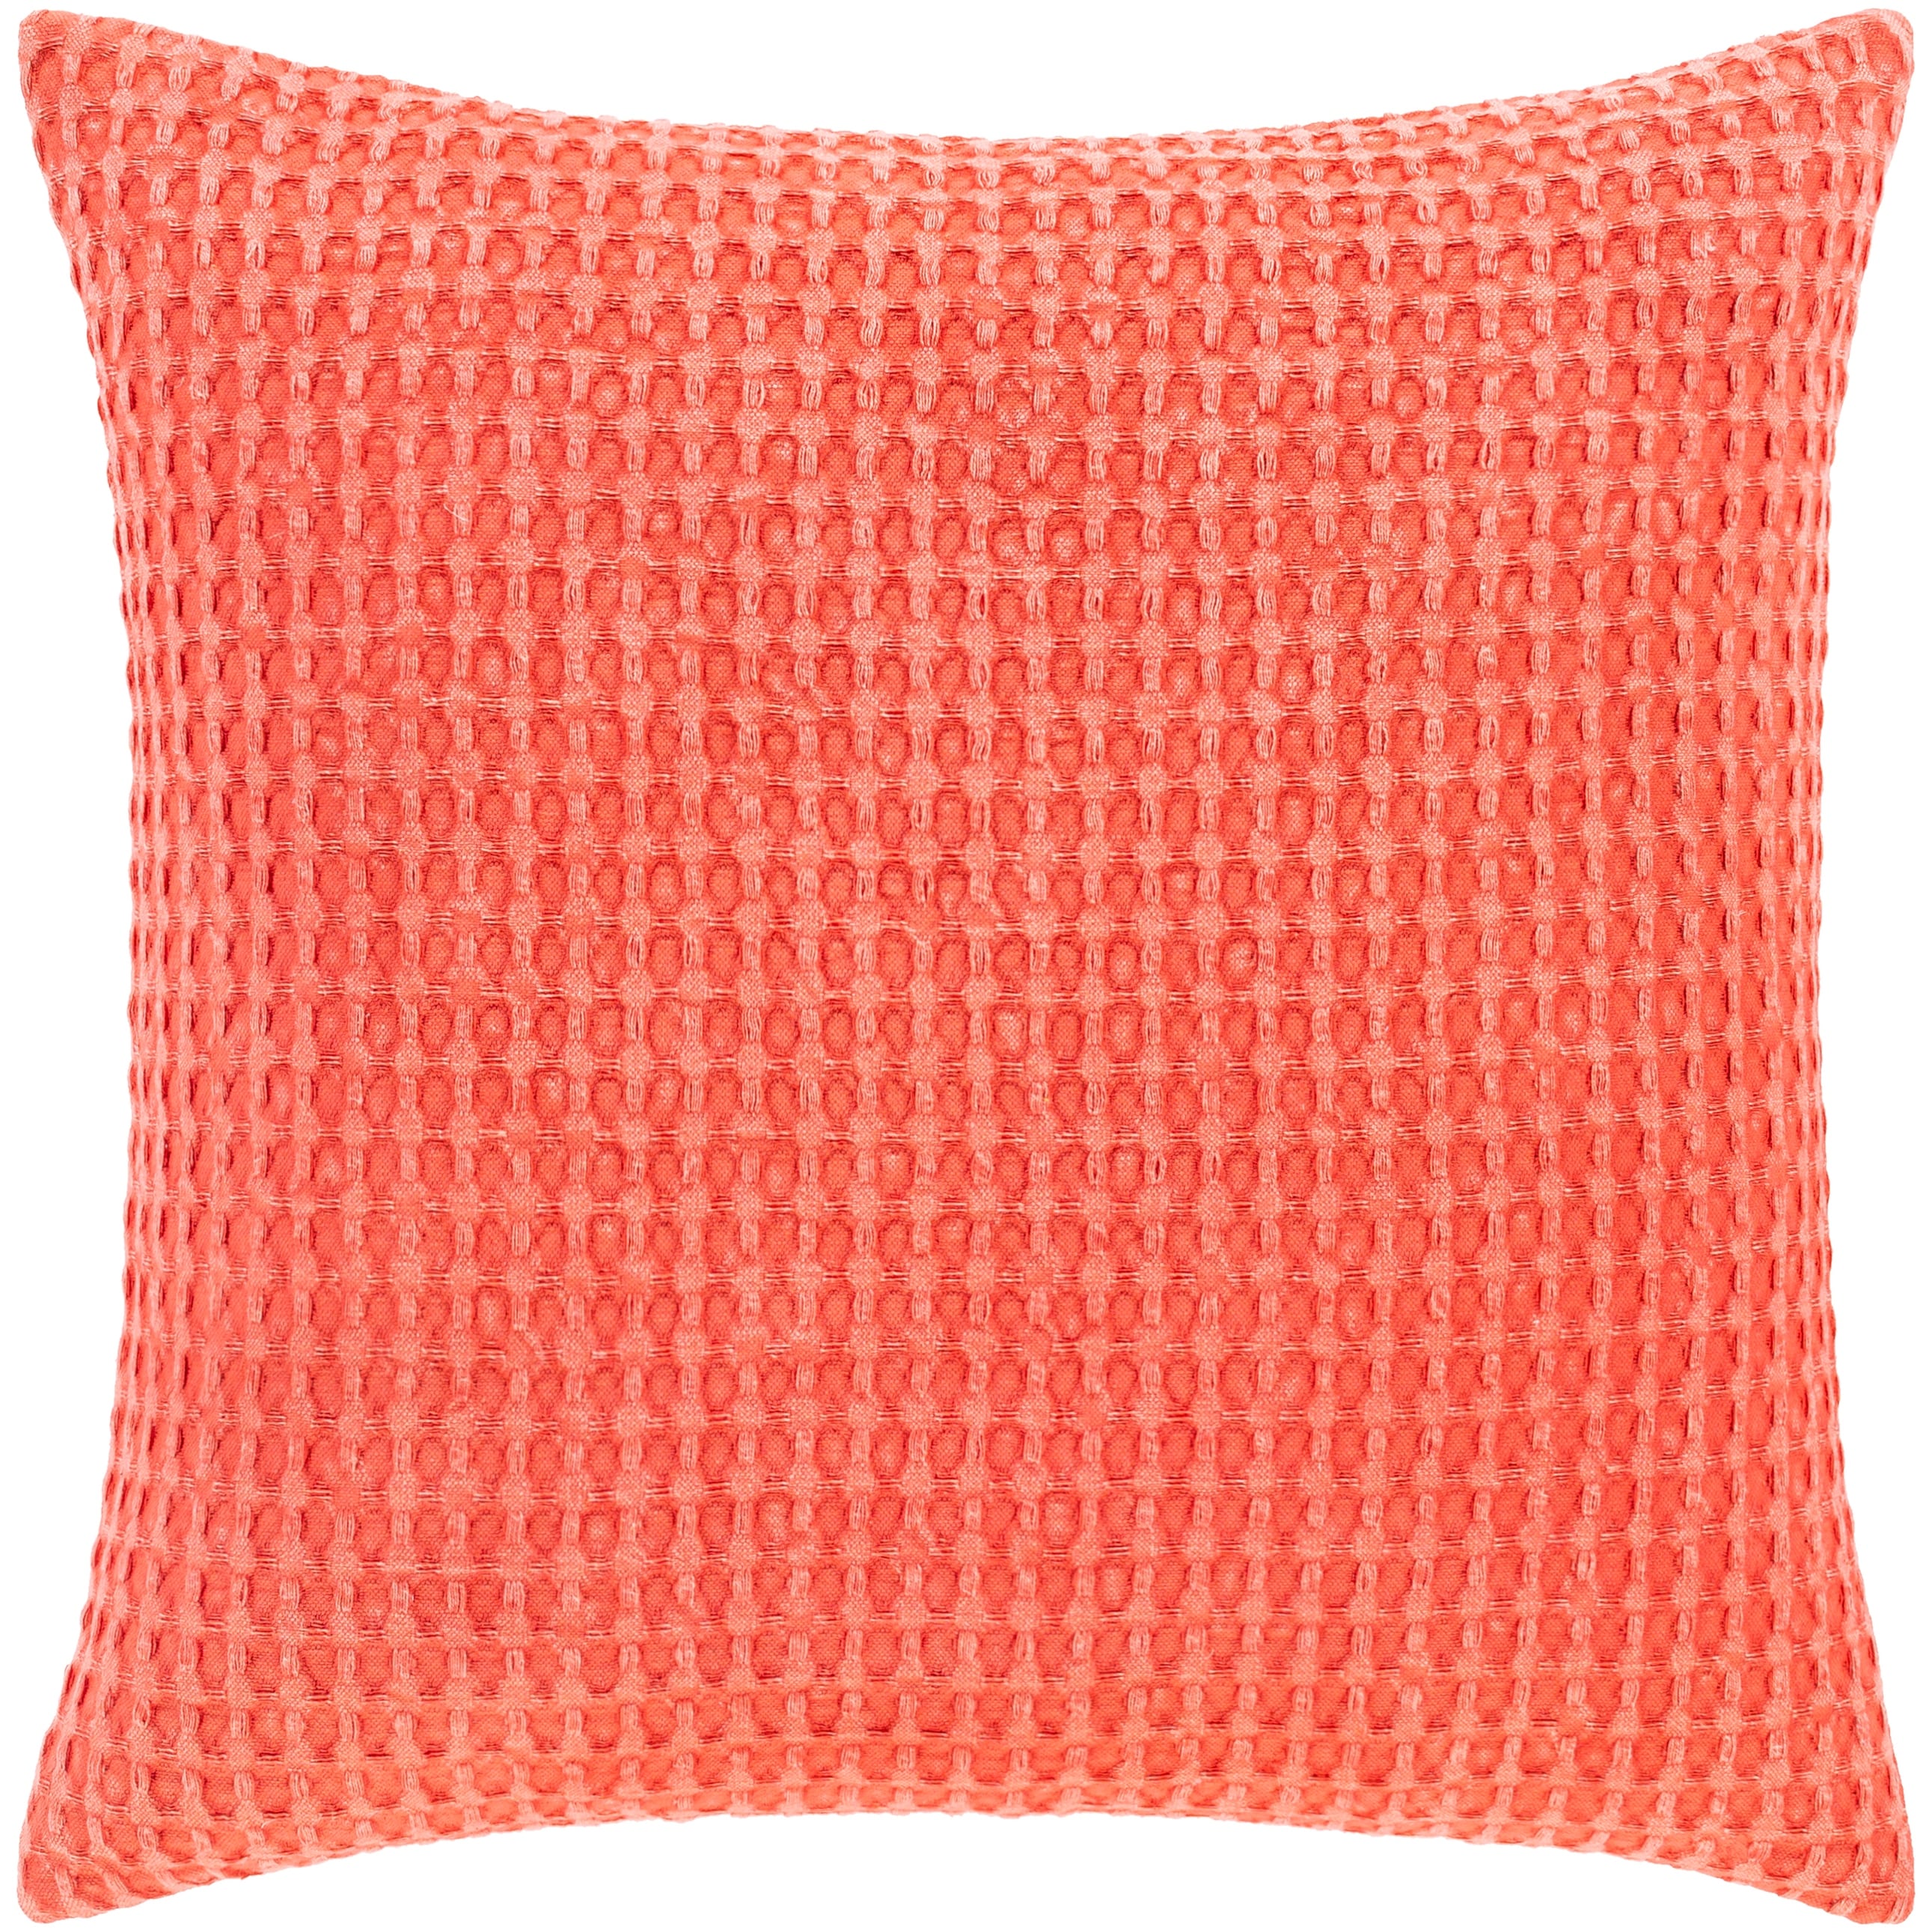 https://ak1.ostkcdn.com/images/products/is/images/direct/5abbdf4c7e988d23f8bf1d7018ddfc013e2731ce/Whitley-Faded-Waffle-Weave-Cotton-Throw-Pillow.jpg